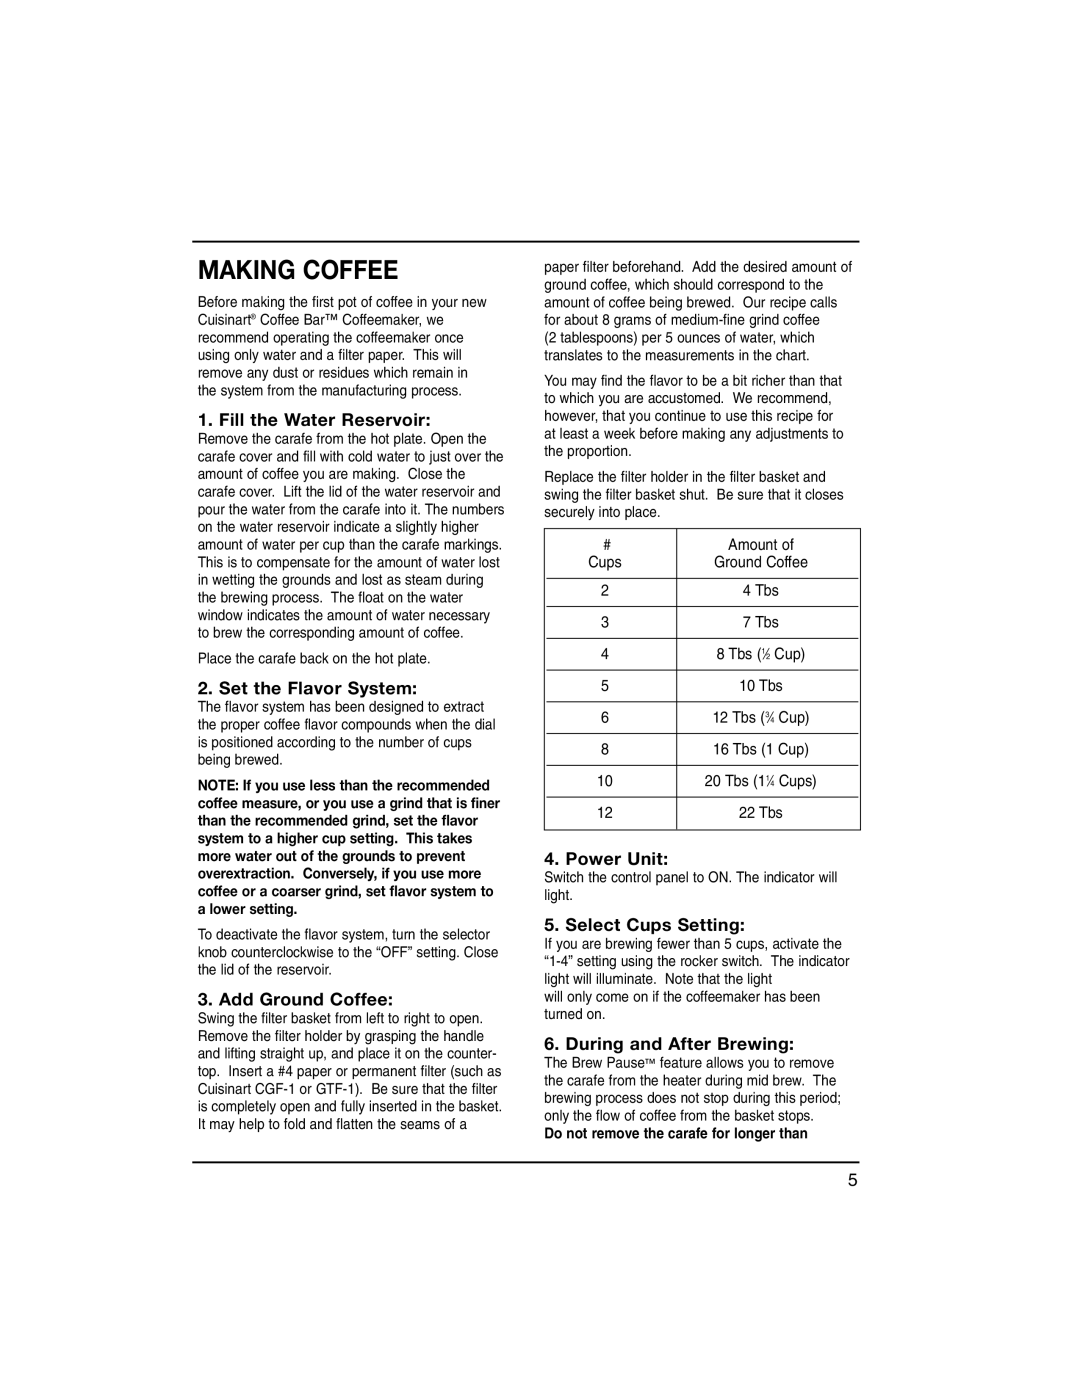 Cuisinart DCC-100C manual Making Coffee, Fill the Water Reservoir, Set the Flavor System, Add Ground Coffee, Power Unit 